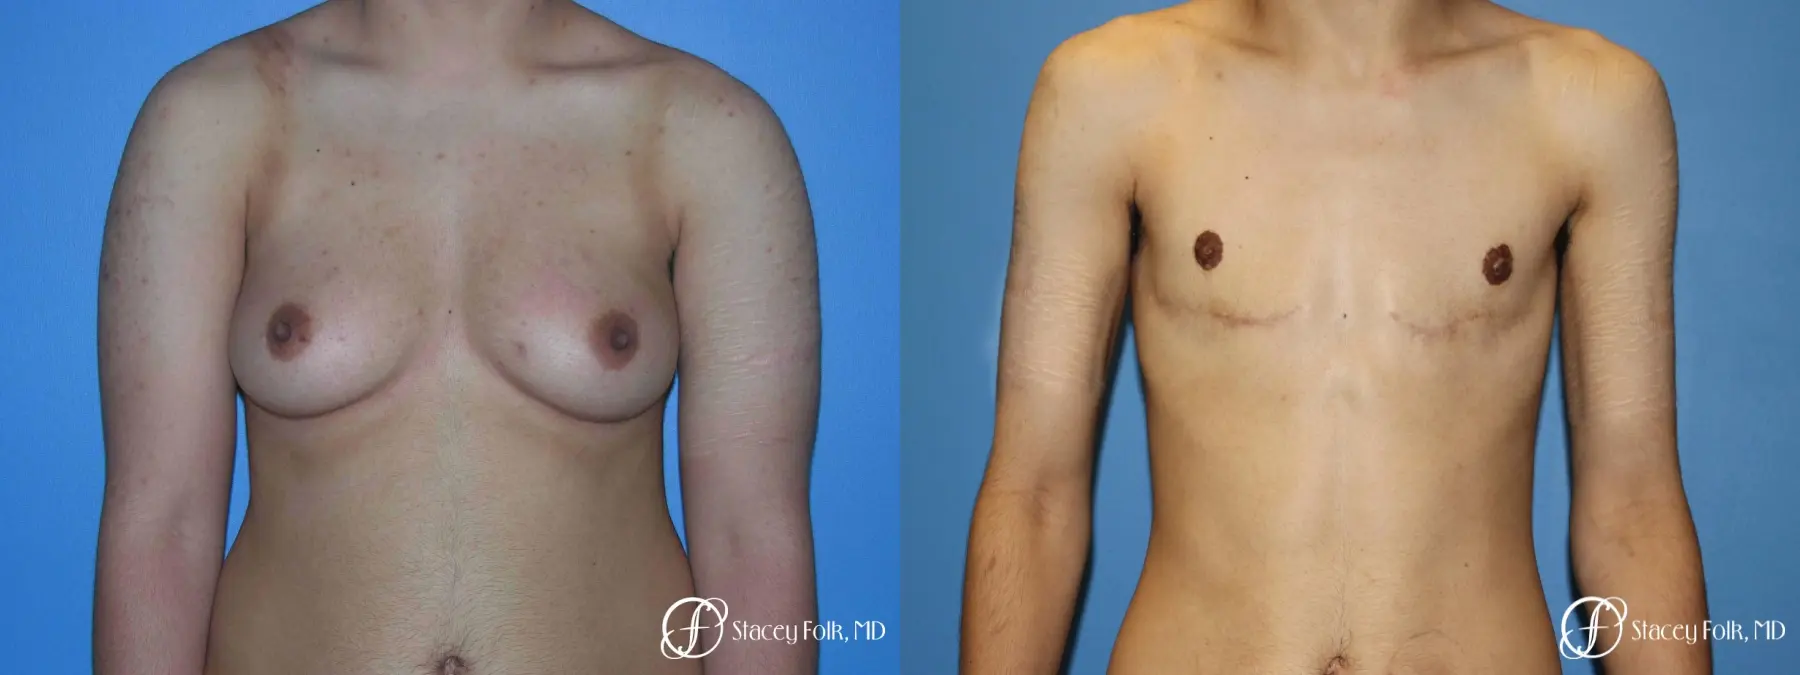 Denver FTM Female to male top surgery 5105 - Before and After 1